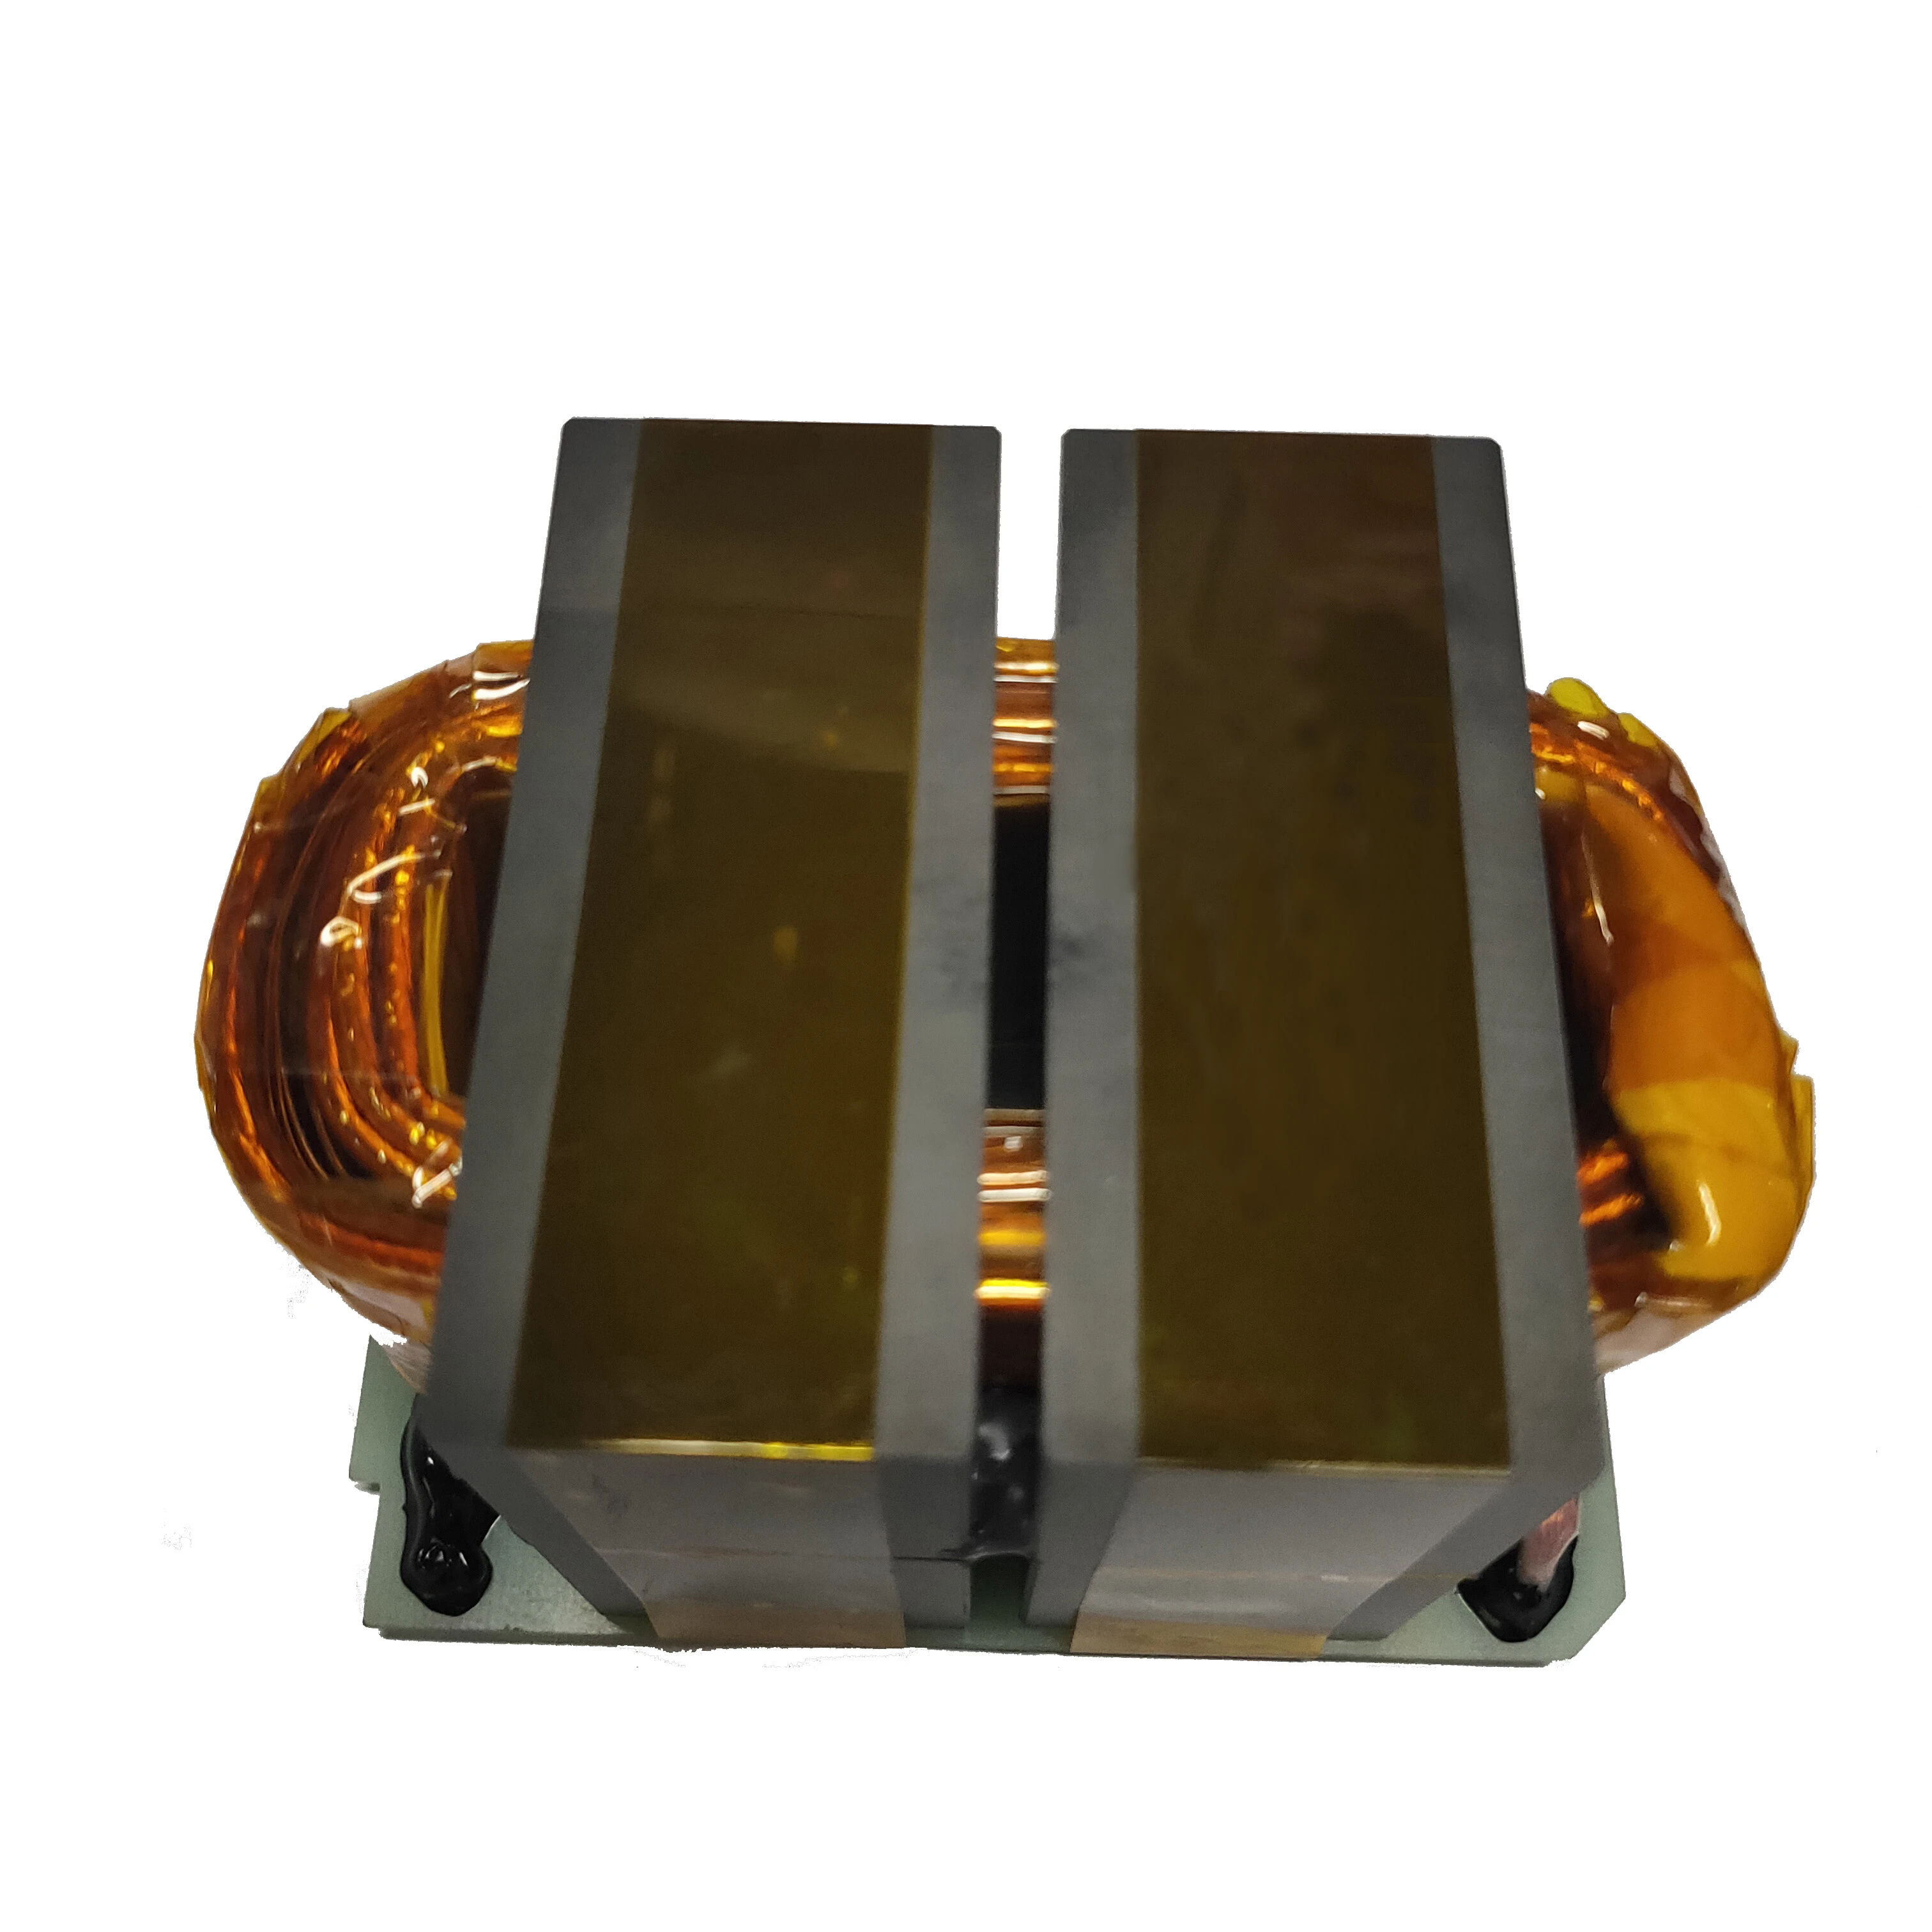 EE70 Power Supply Transformers for industrial applications